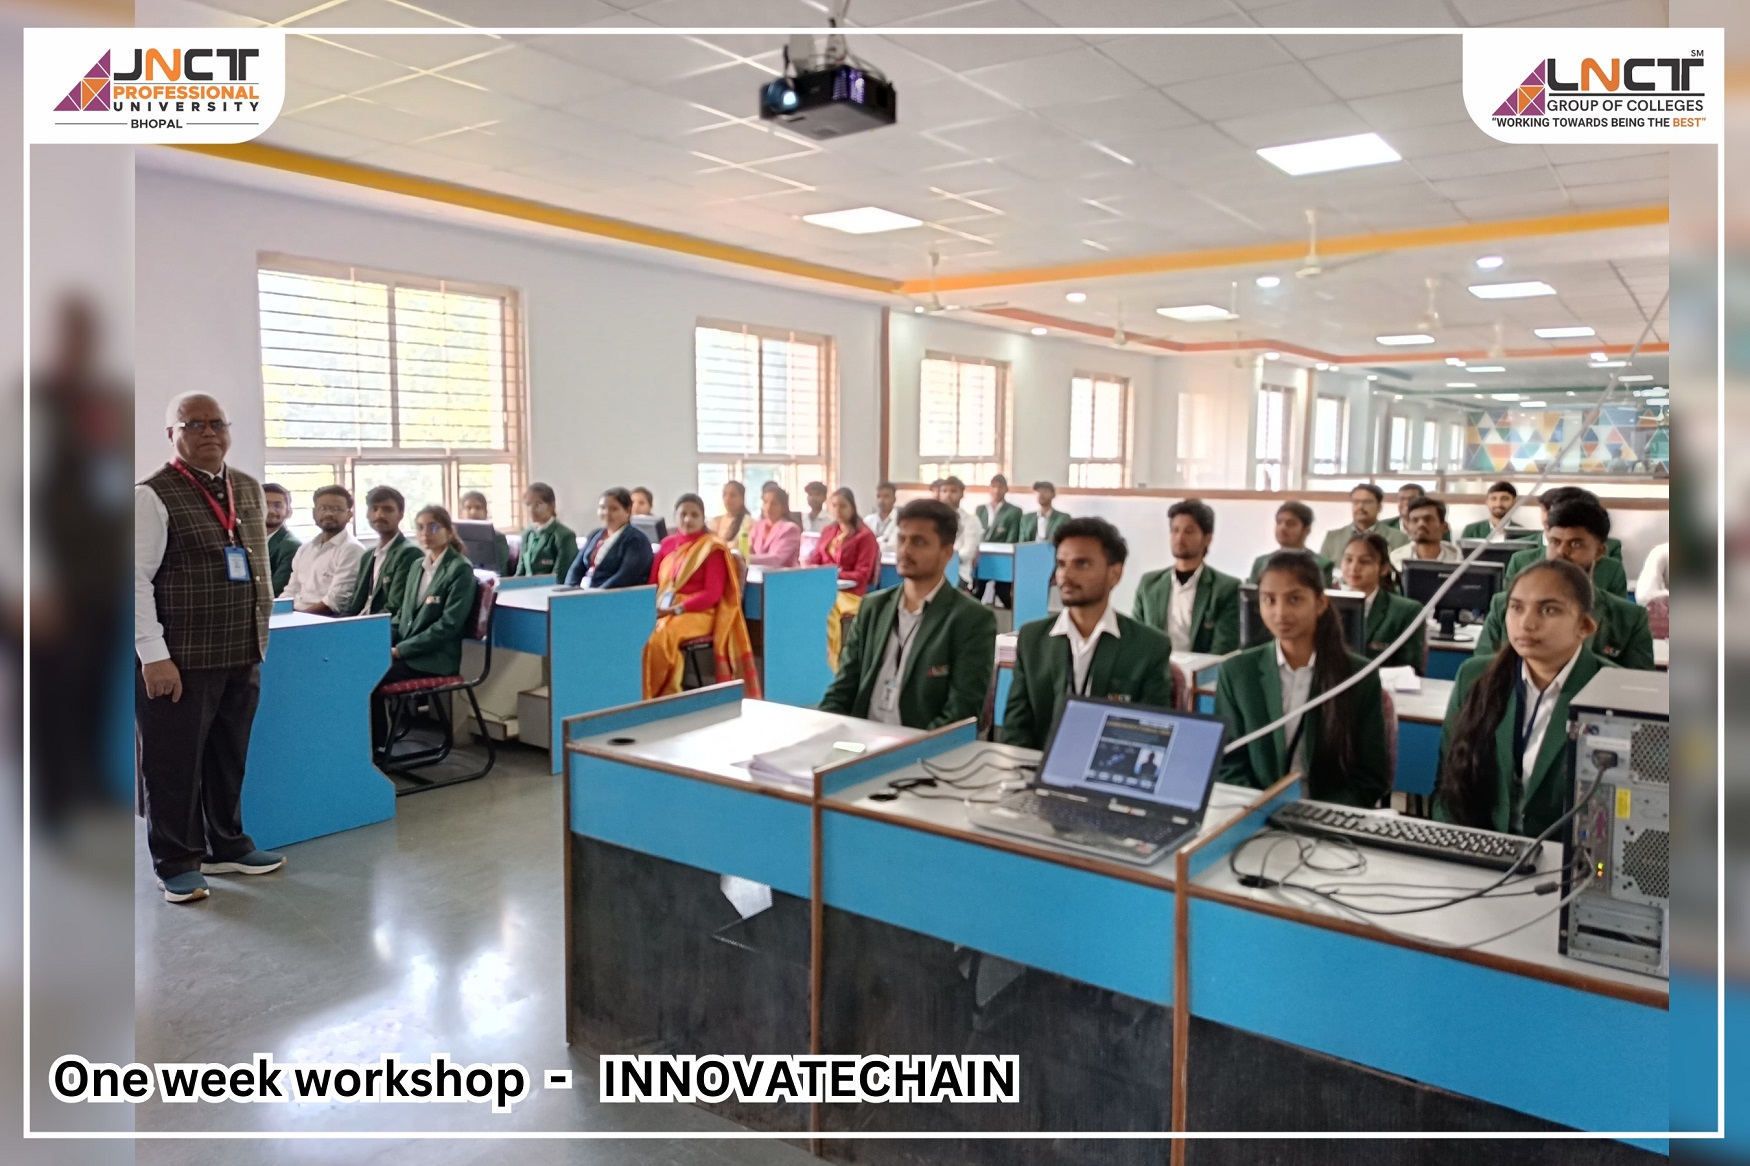 workshop on “InnovateChain” that explored the complexities of Blockchain